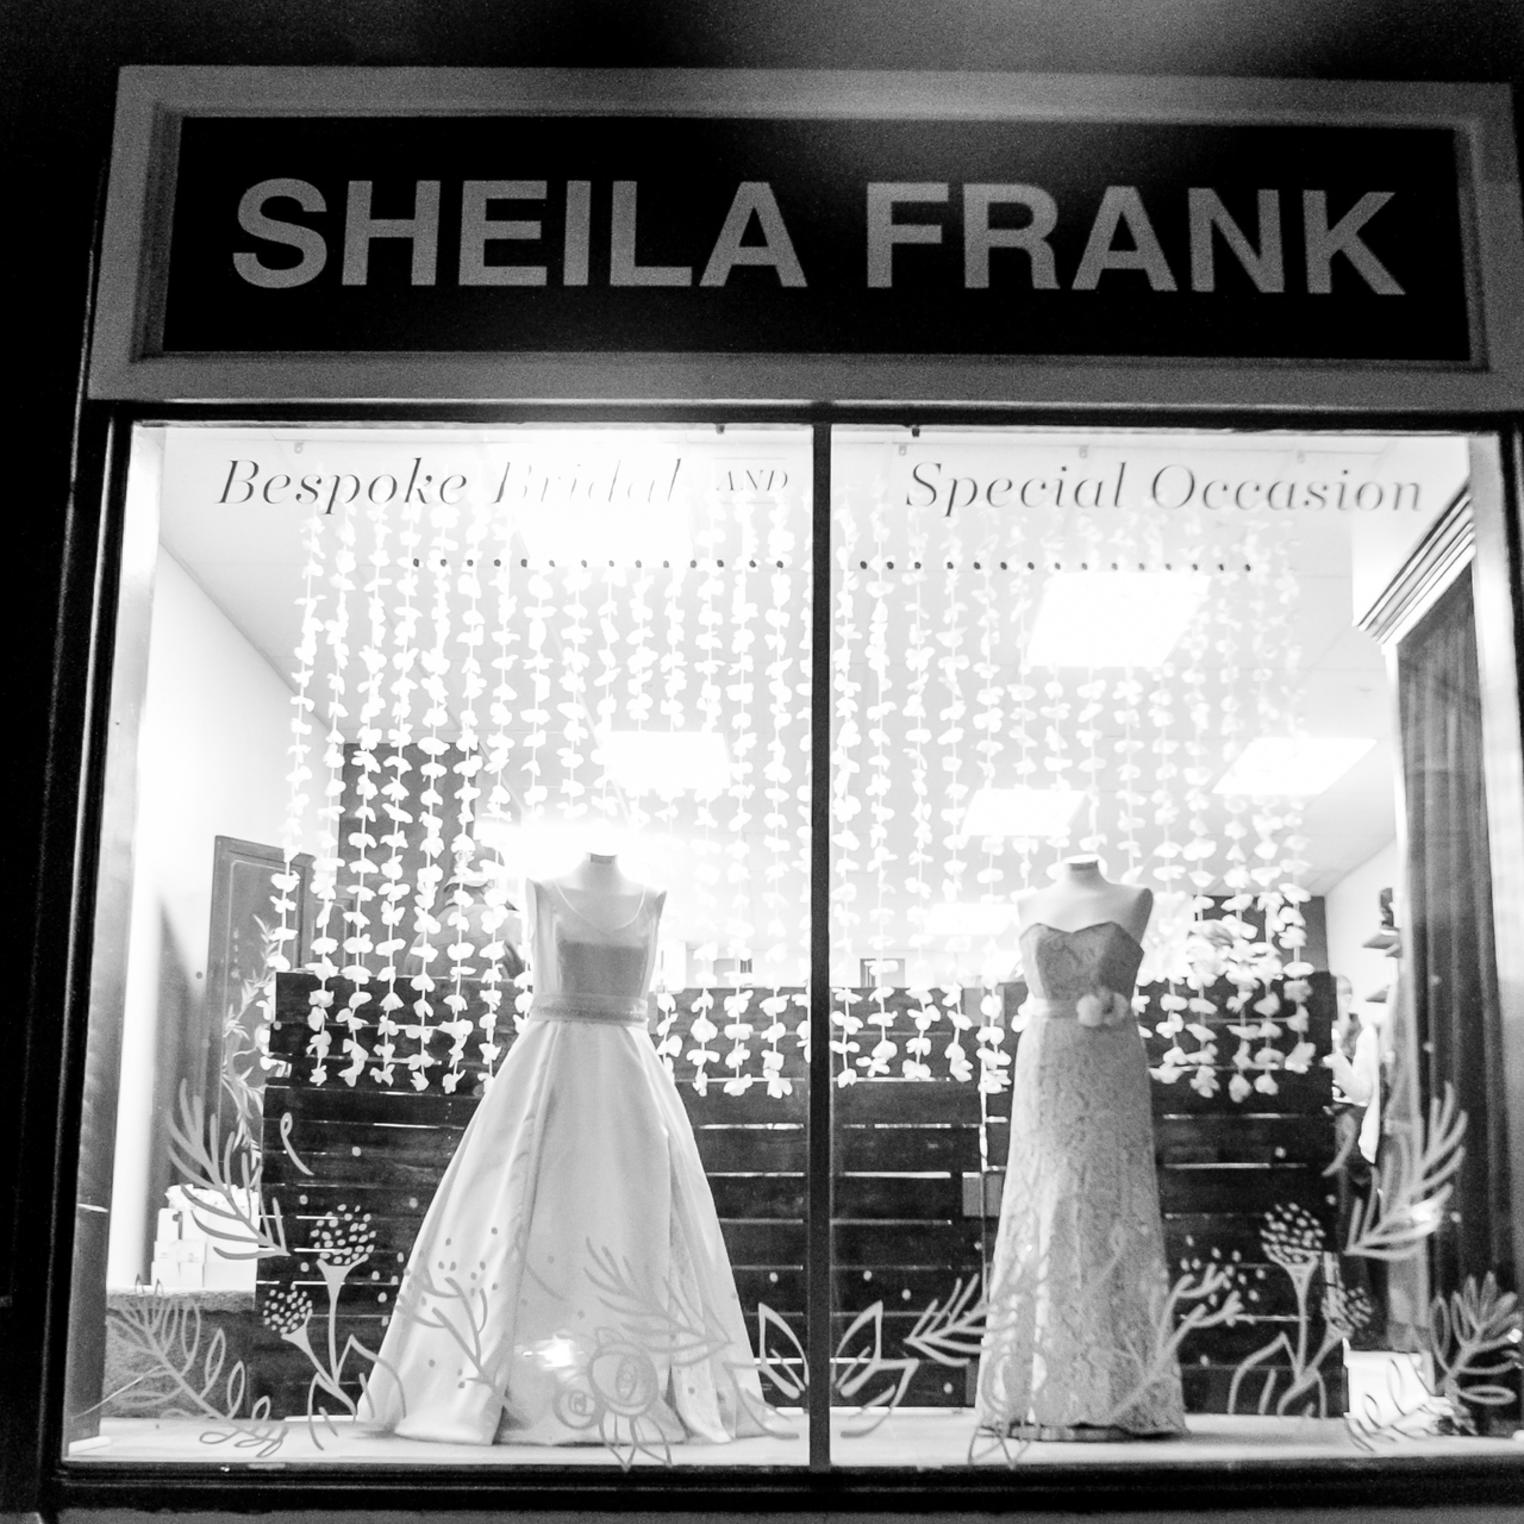 Sheila Frank Store Front